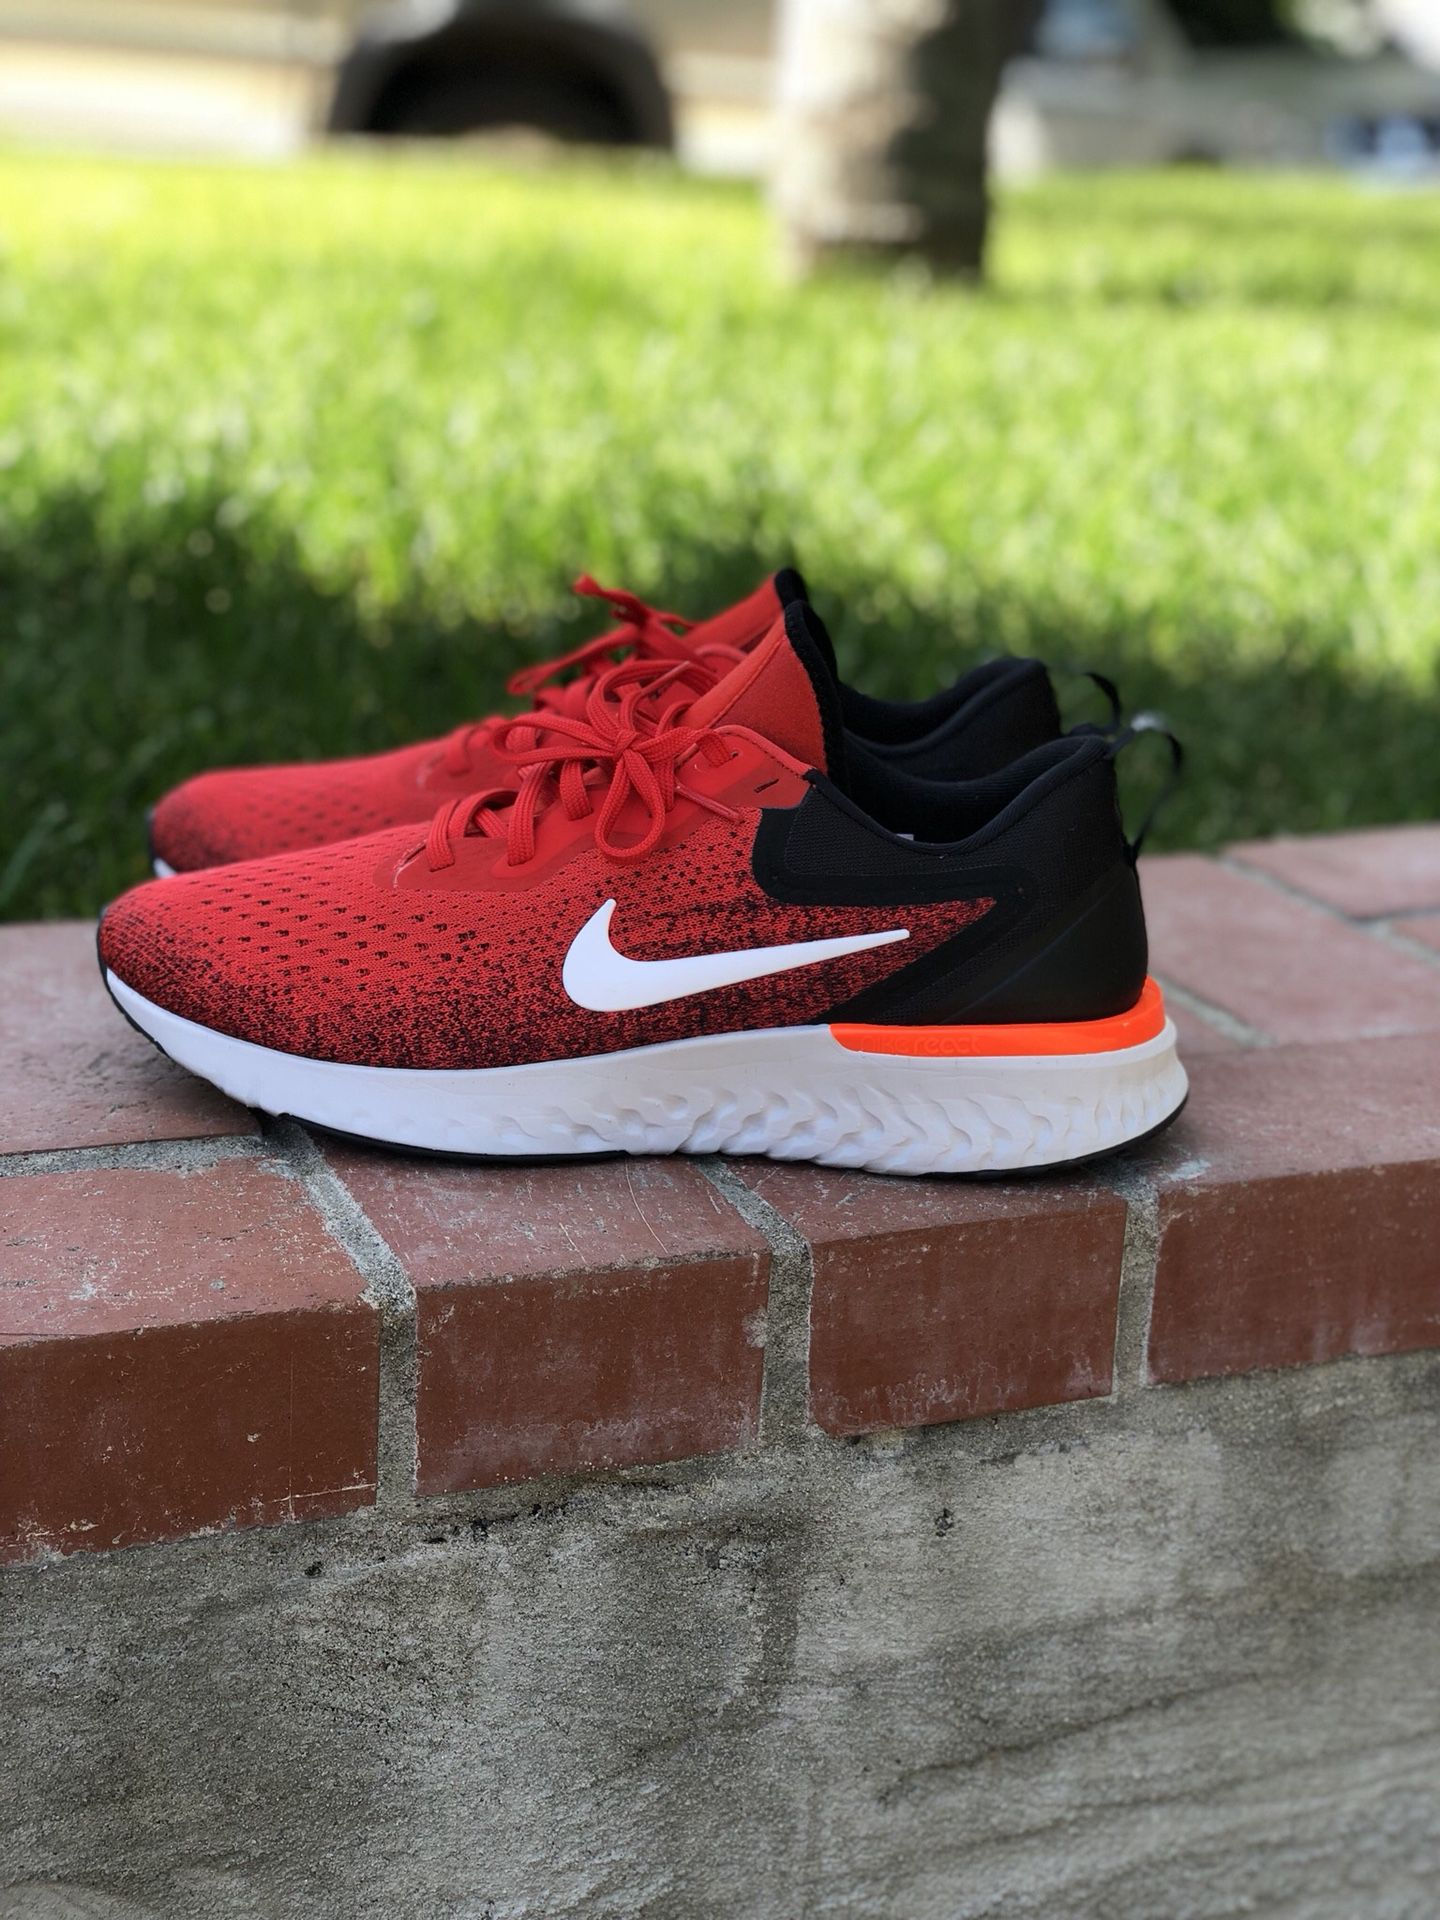 Mamut eje Atlético Nike Odyssey React Habanero red/white-black 9.5 for Sale in San Jose, CA -  OfferUp